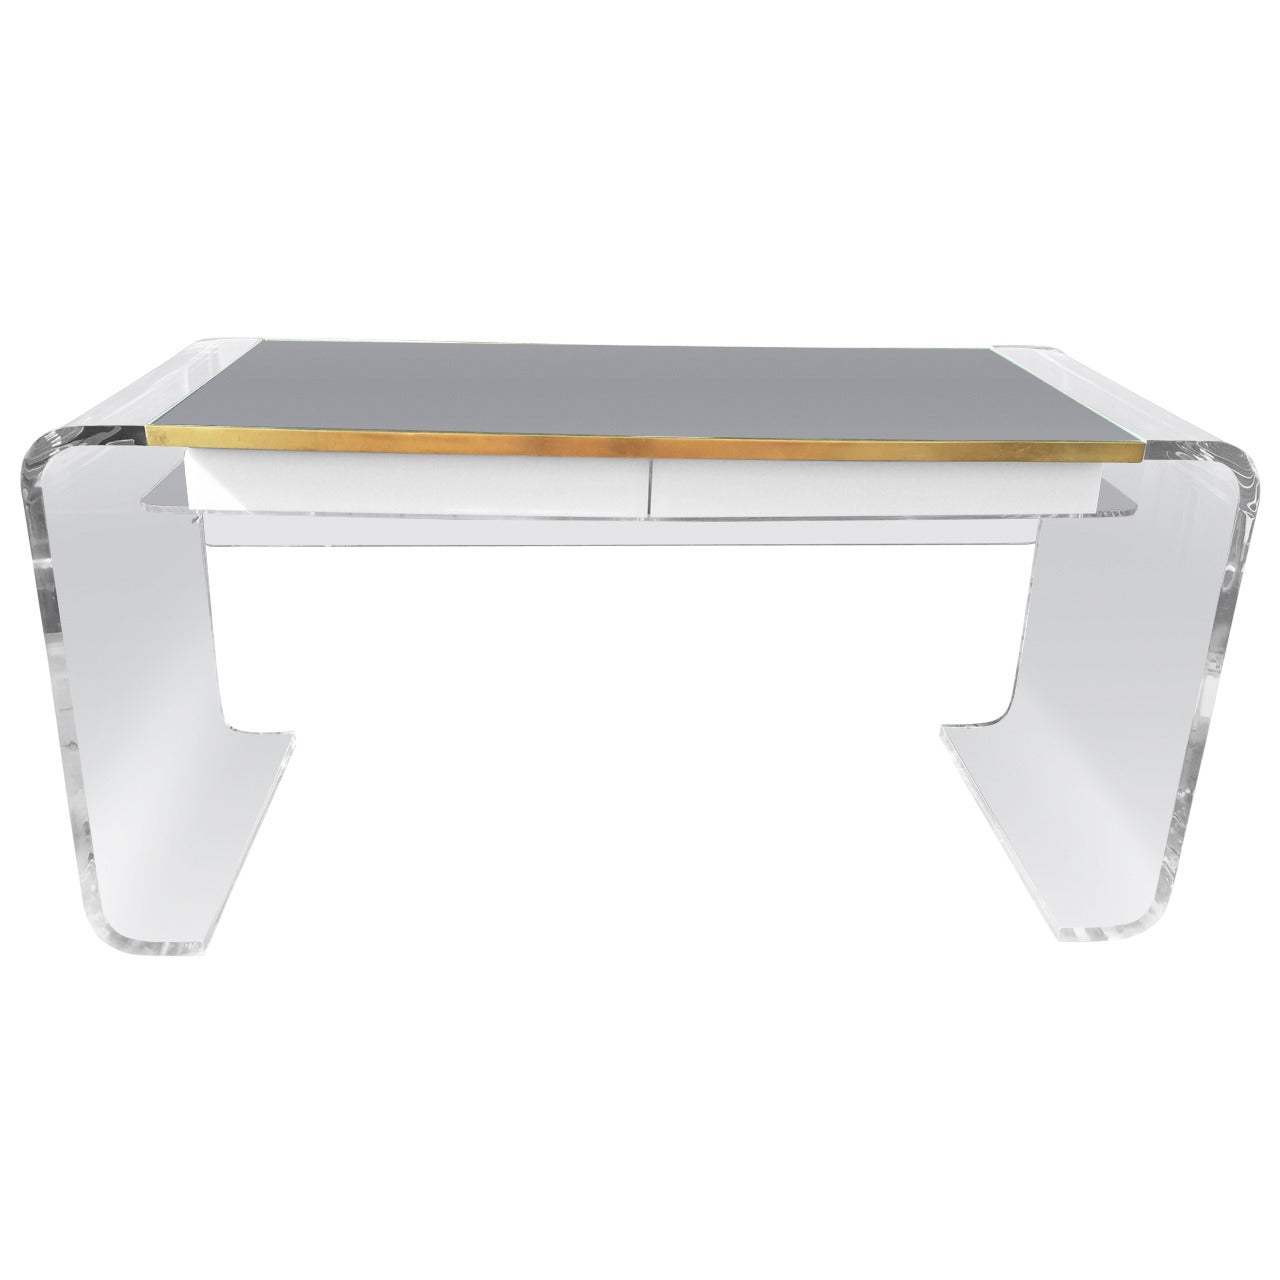 Outrageous Vintage Lucite Waterfall Desk